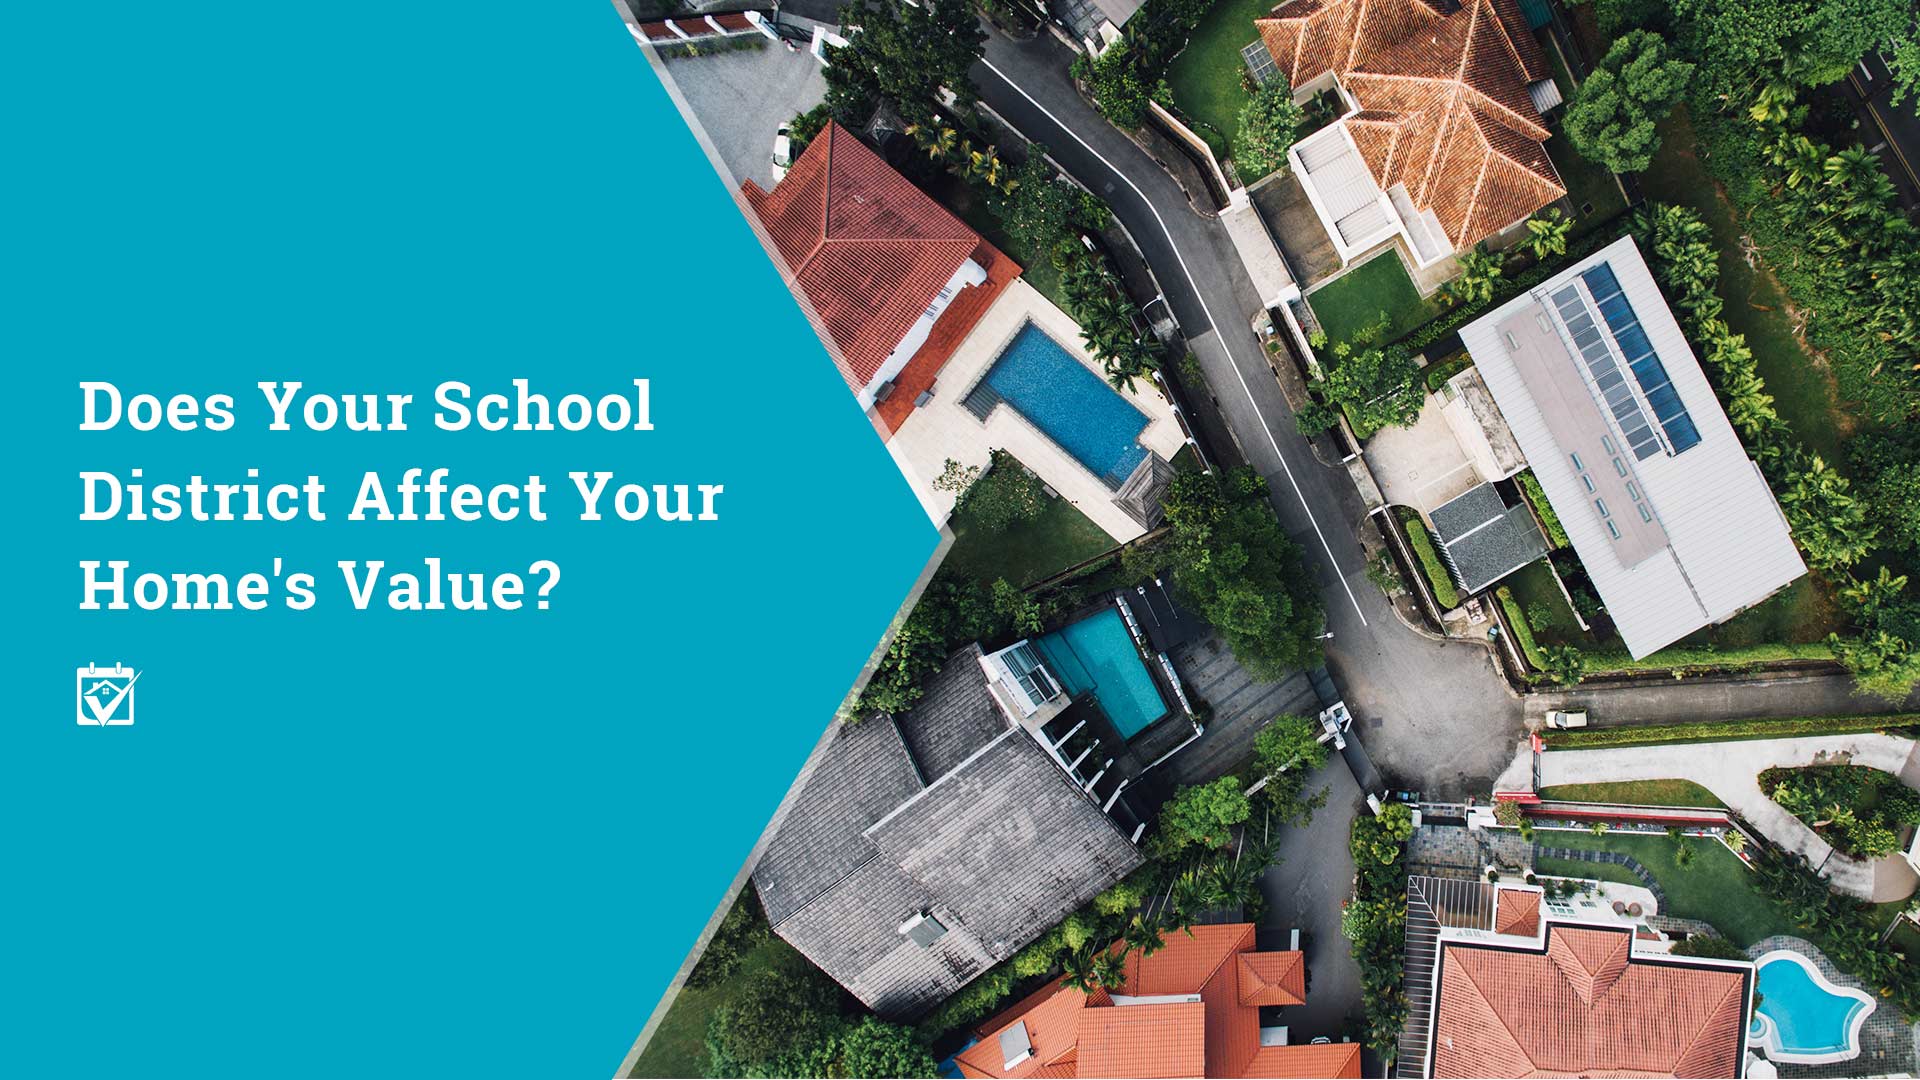  Does Your School District Affect Your Home’s Value?